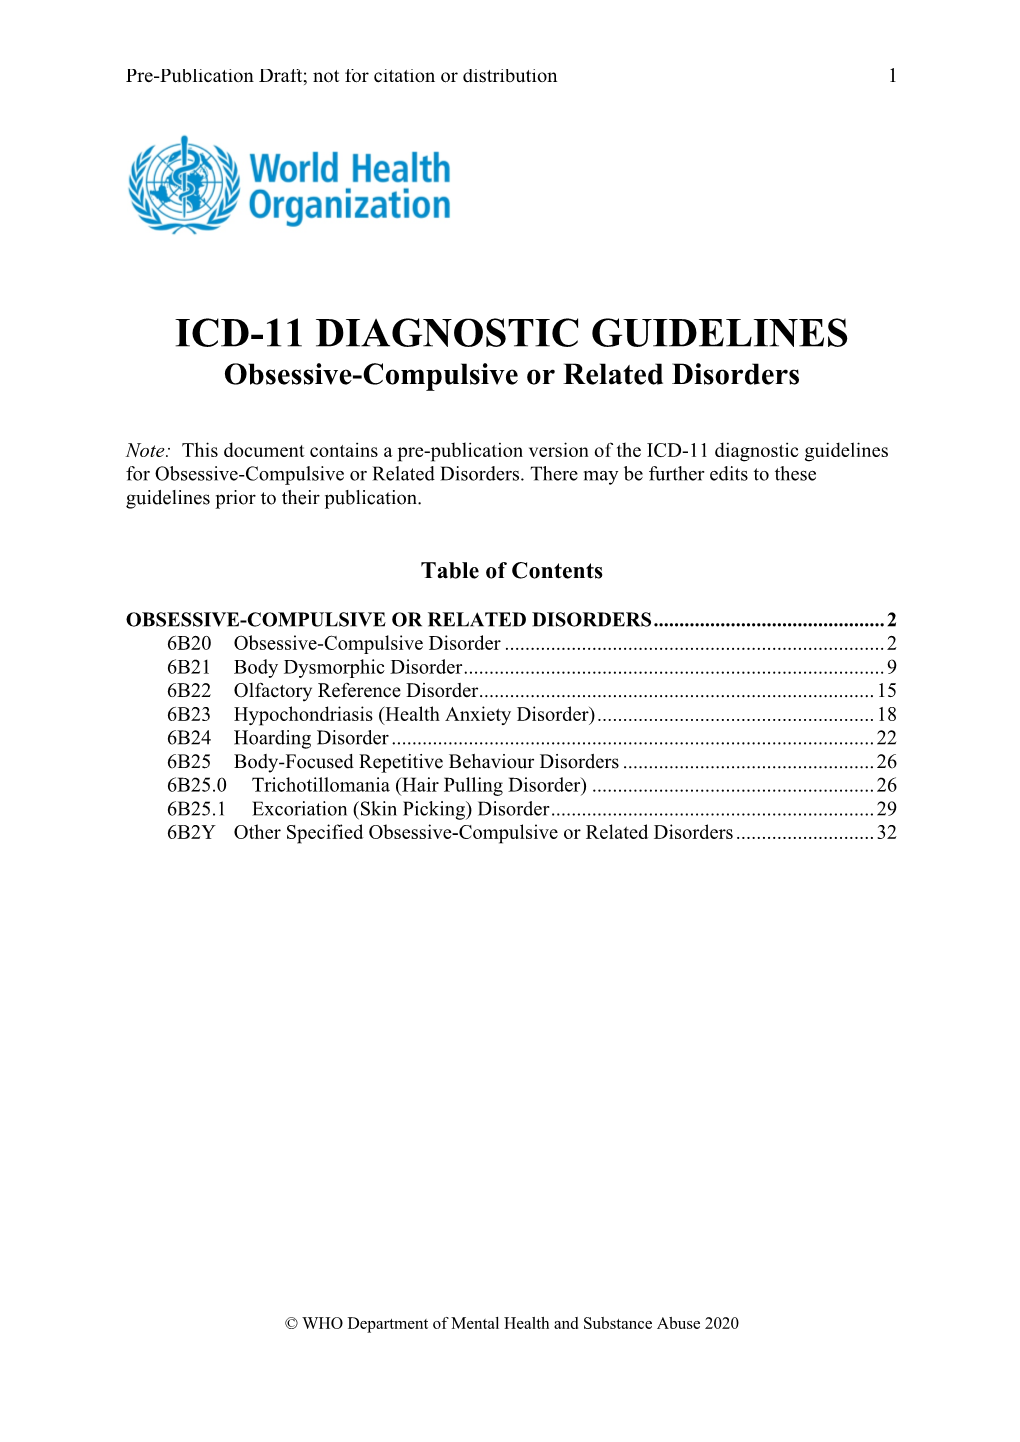 ICD-11 DIAGNOSTIC GUIDELINES Obsessive-Compulsive Or Related Disorders